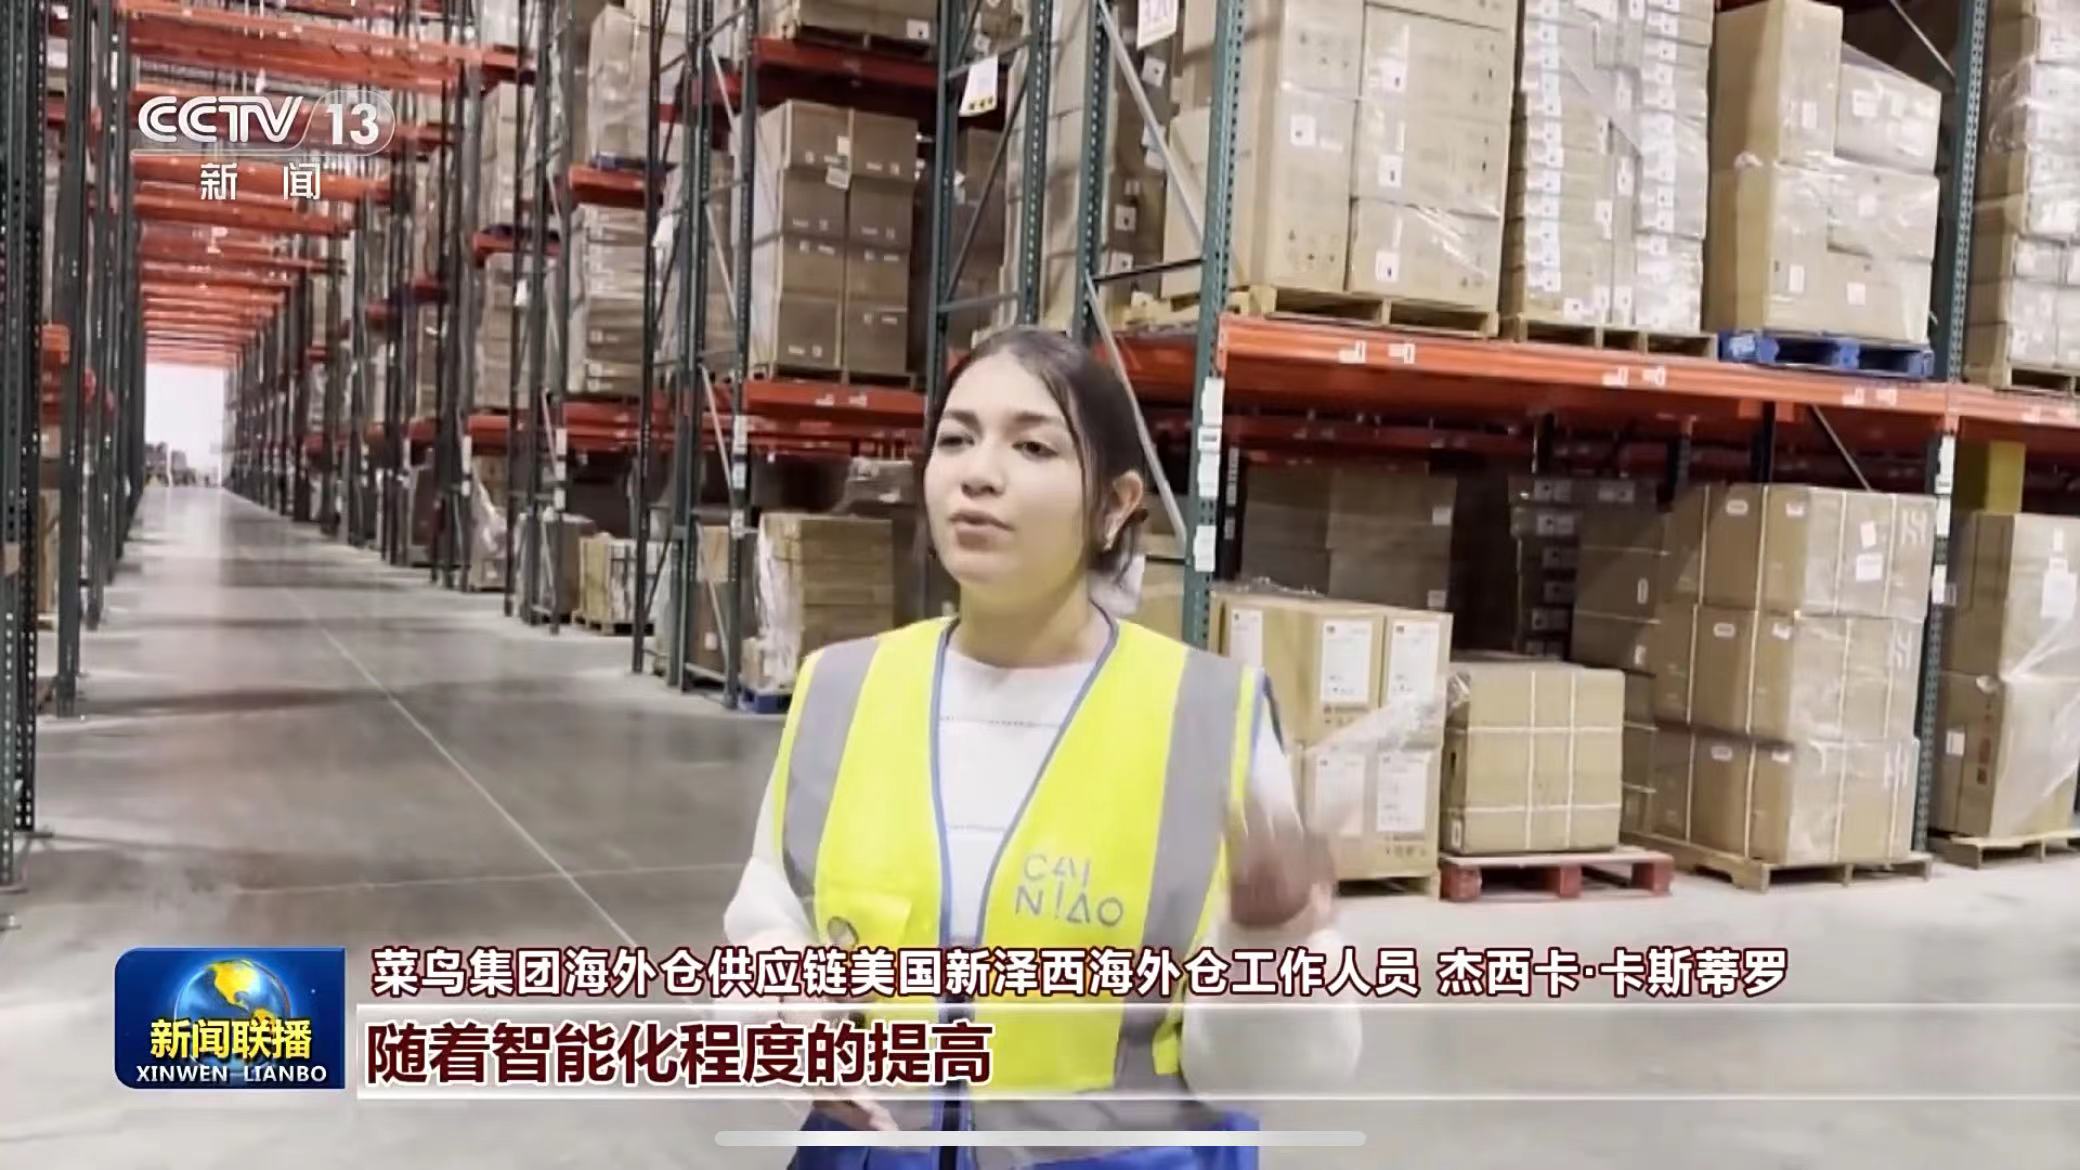 A worker at Alibaba's warehouse in New Jersey, U.S. receives an interview by China Media Group. /Screenshot from CMG